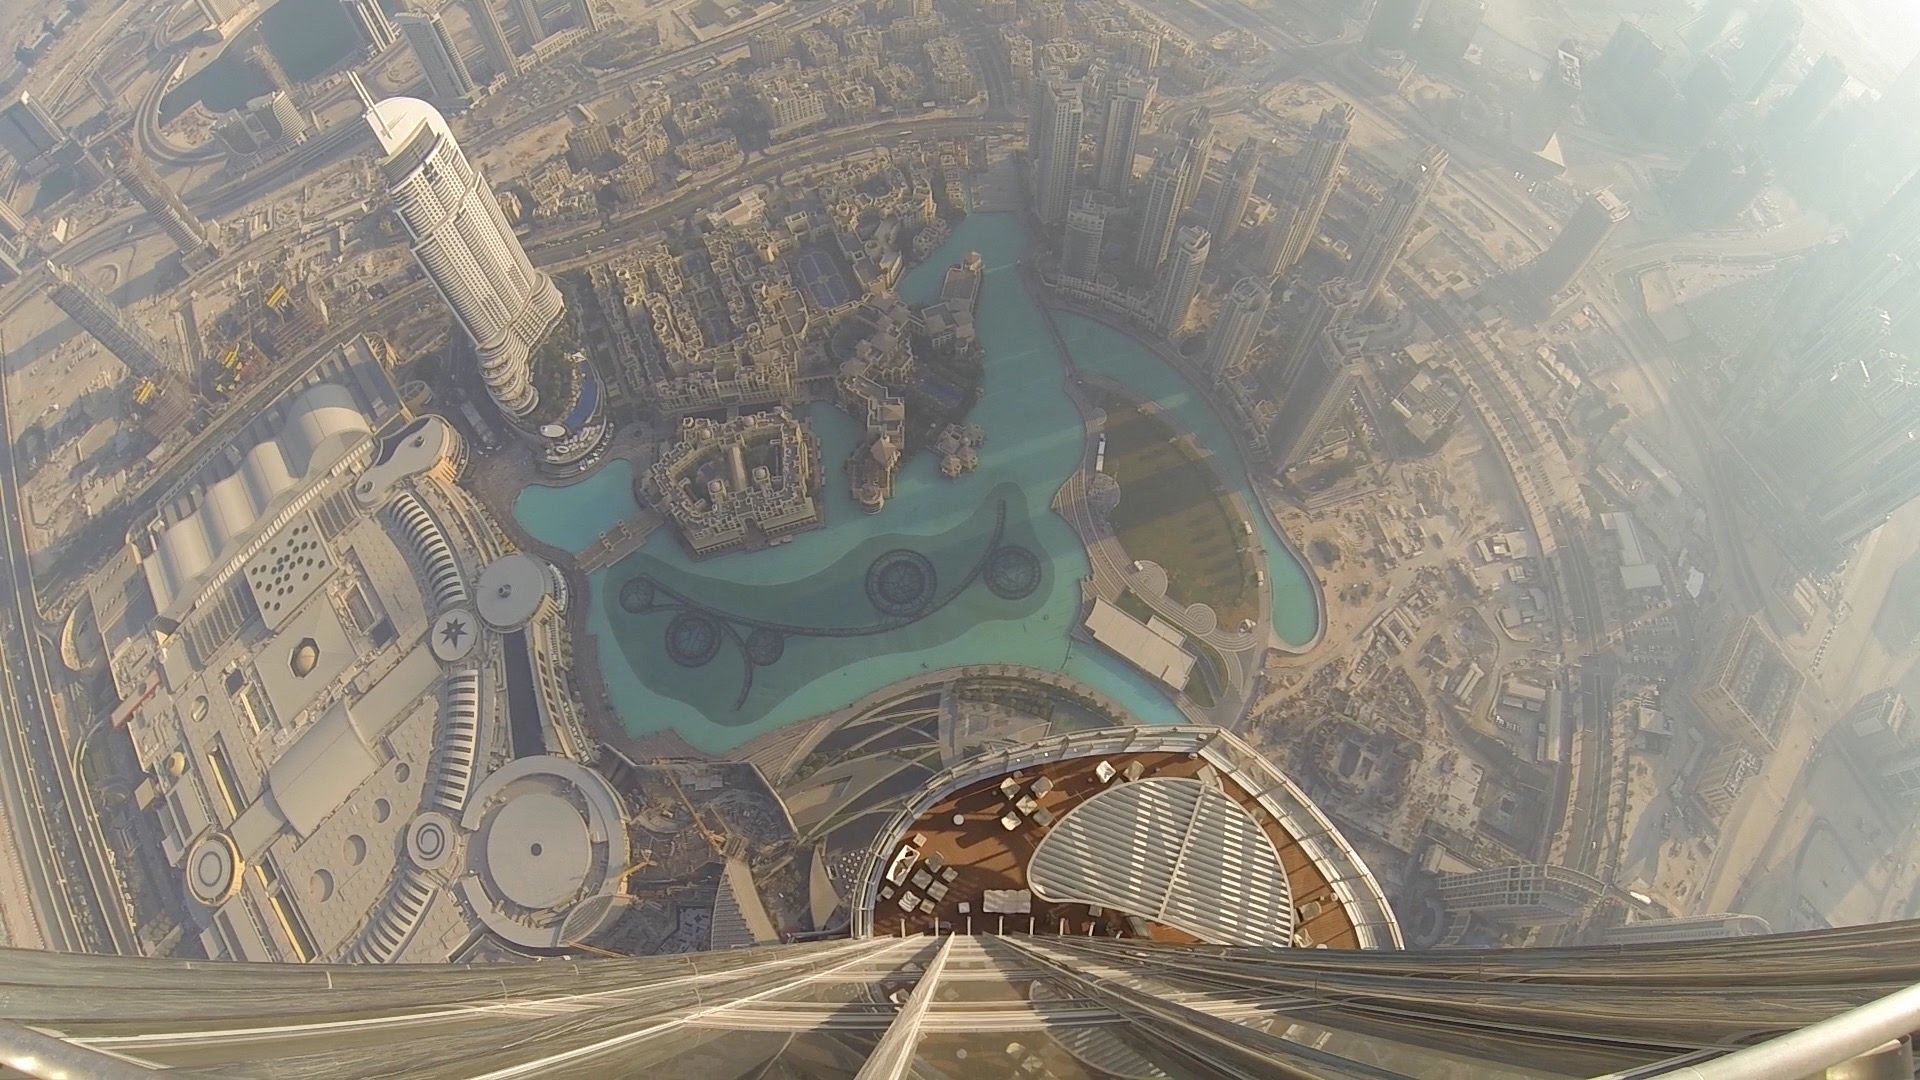 Amazing view from the Burj Khalifa - At the top SKY - YouTube